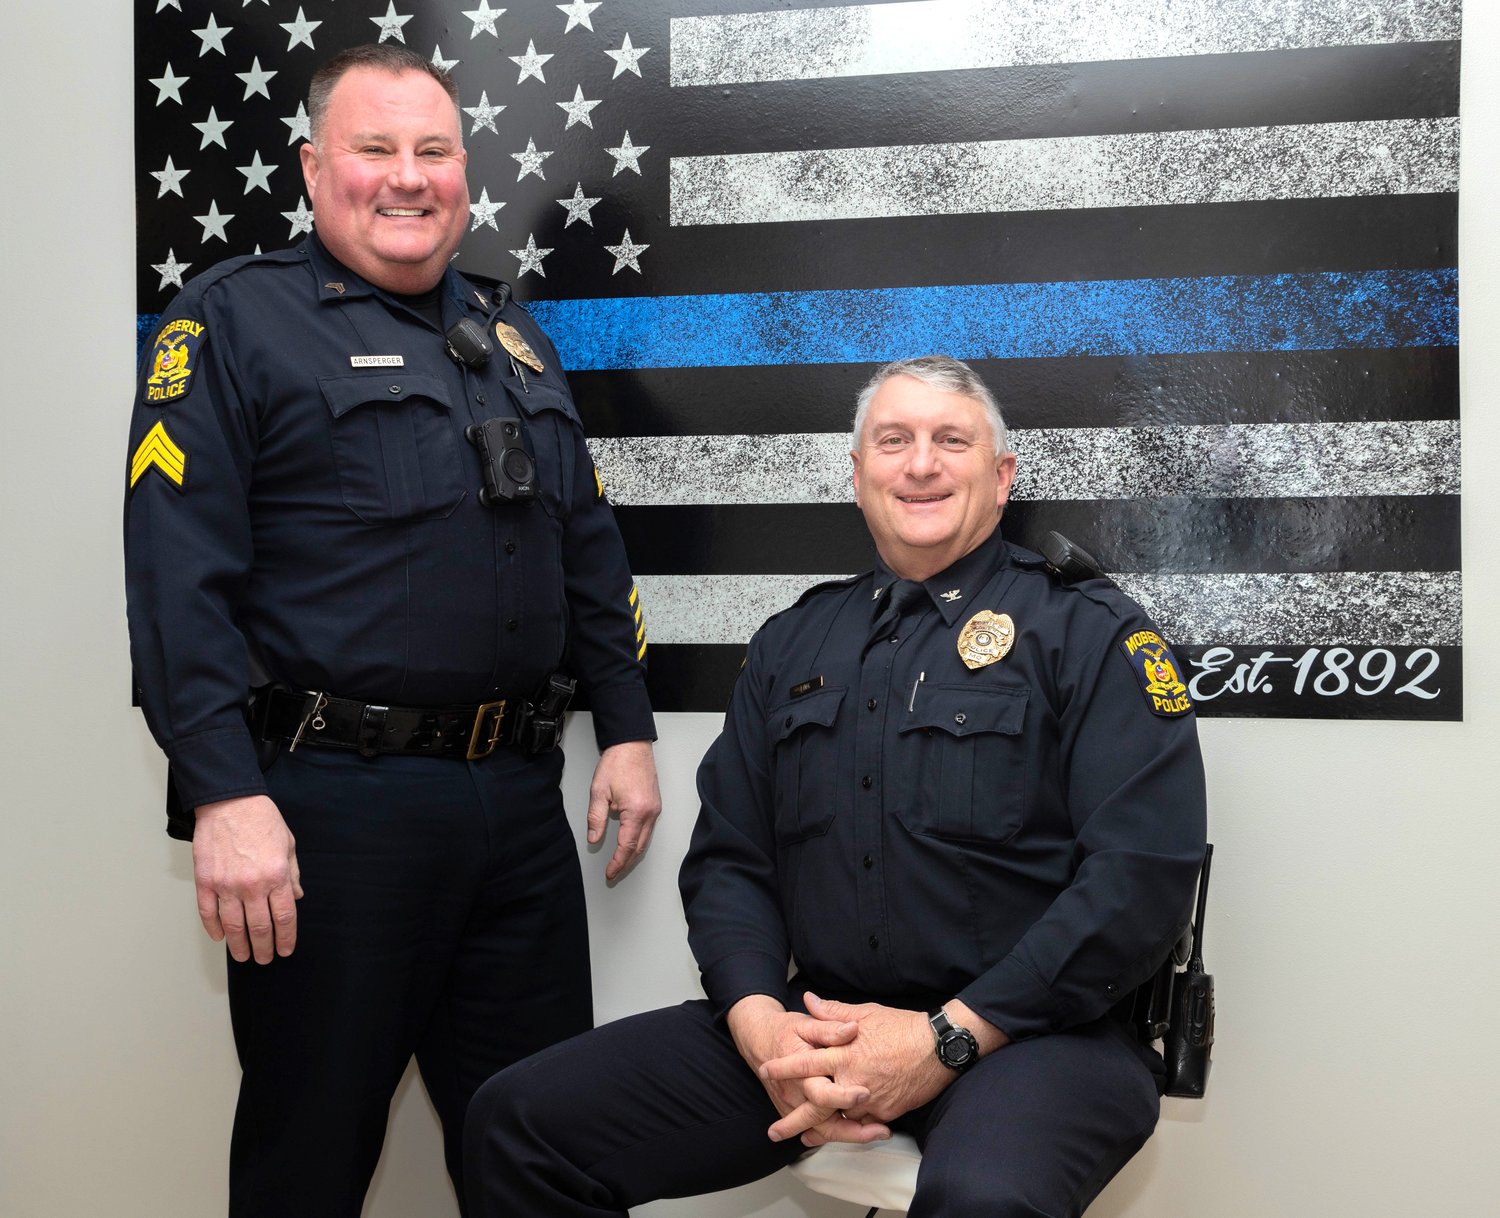 Sgt. Mark Arnsperger and Moberly Police Chief Troy Link pose in front of a Back the Blue flag at Moberly Police Department. The two began their careers with Moberly PD more than 30 years ago.